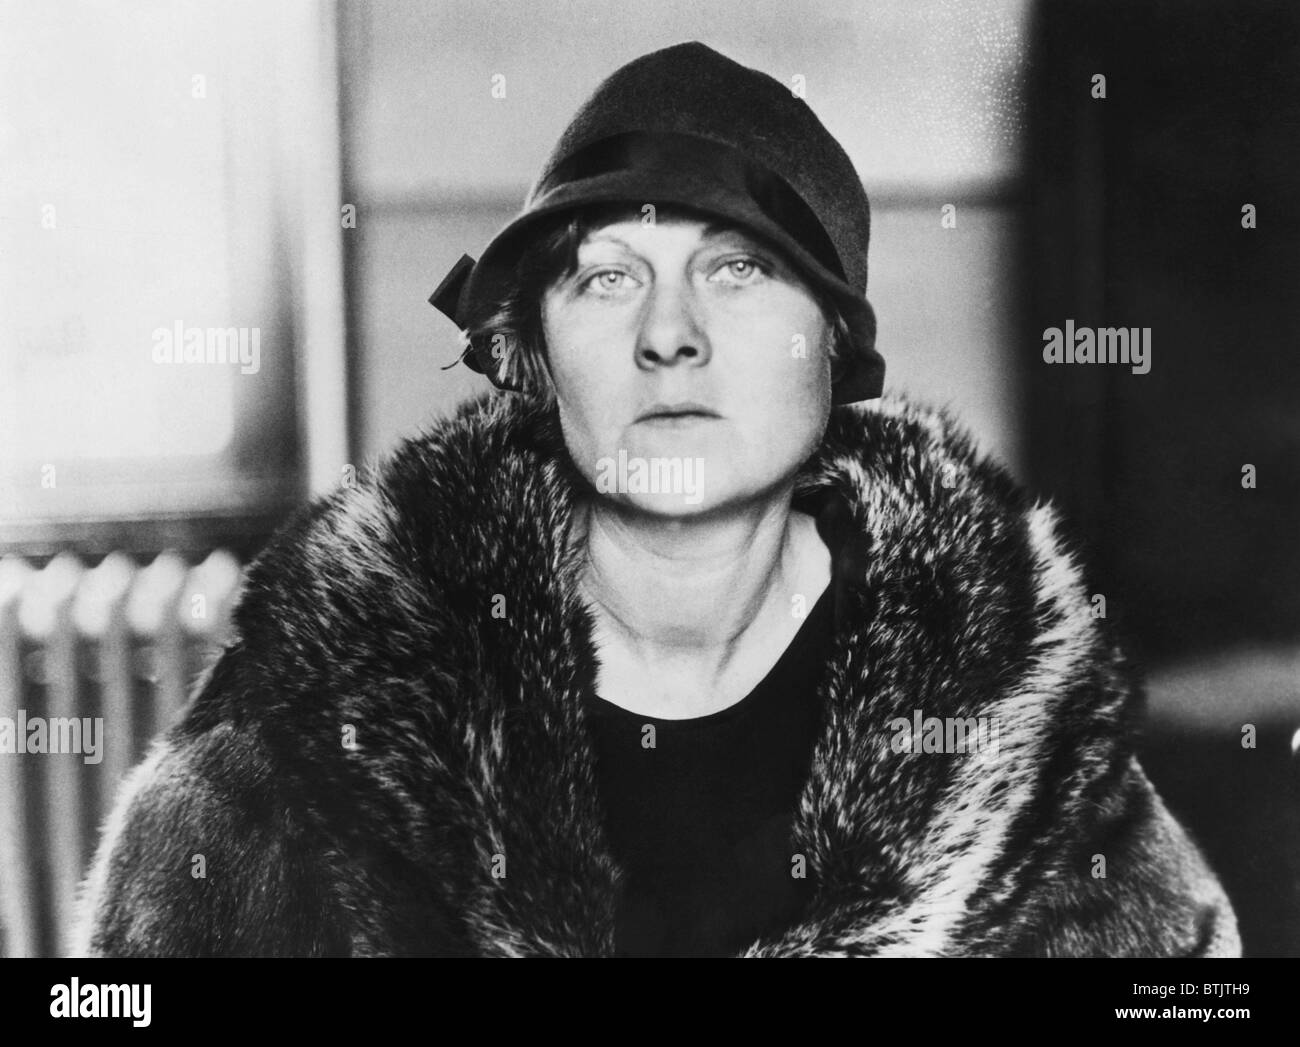 Ruth Snyder, (1895-1928), Sentenced to the death penalty in 1928 for the murder of her husband, c. 1920s. Stock Photo